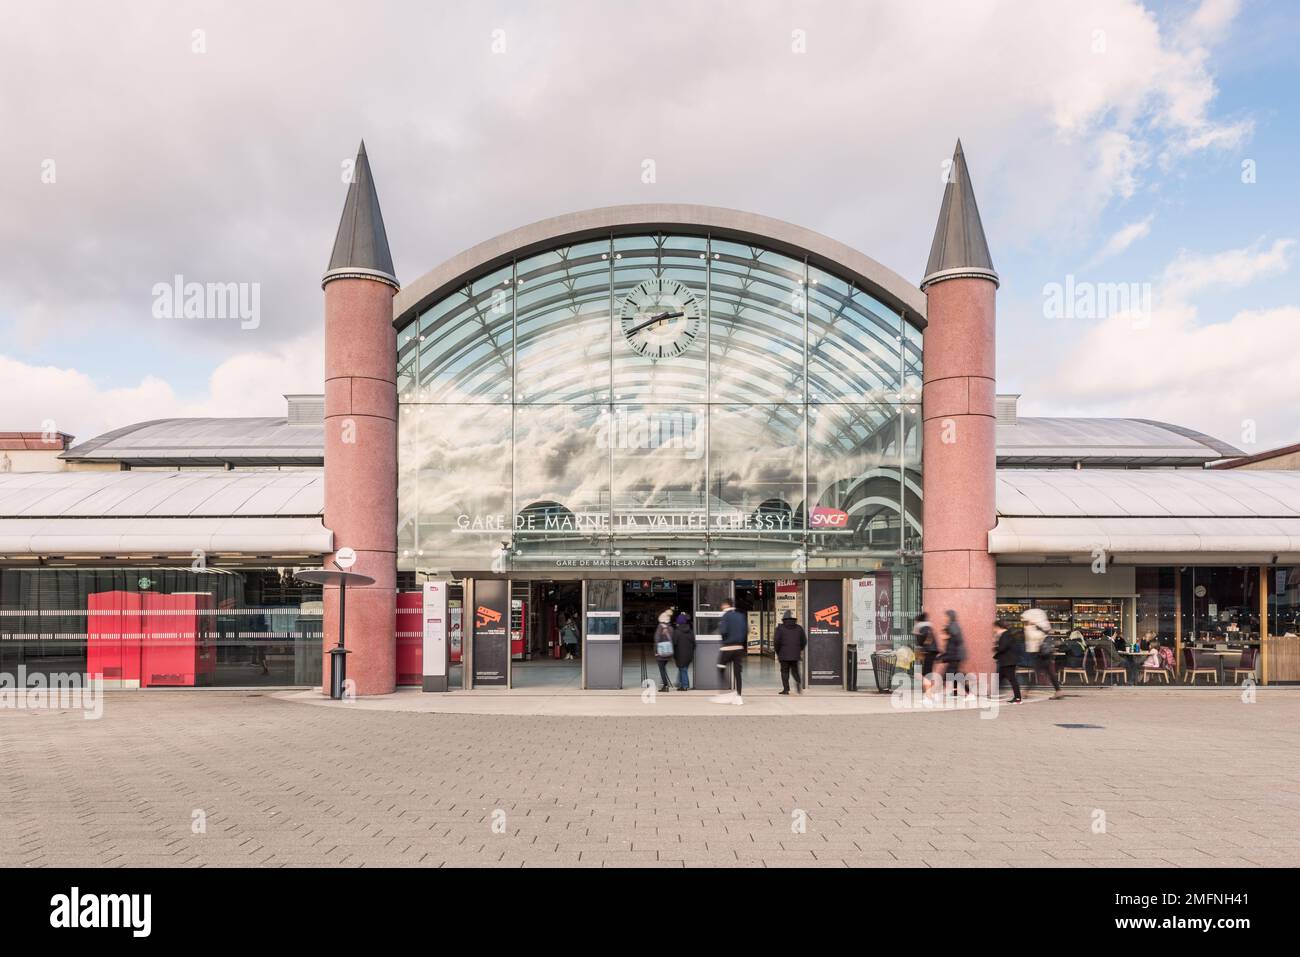 Entrance to Marne La Vallée Chessy Railway Station in Disneyland Paris in France. It is a large combined commuter rail and high-speed railstation. Stock Photo